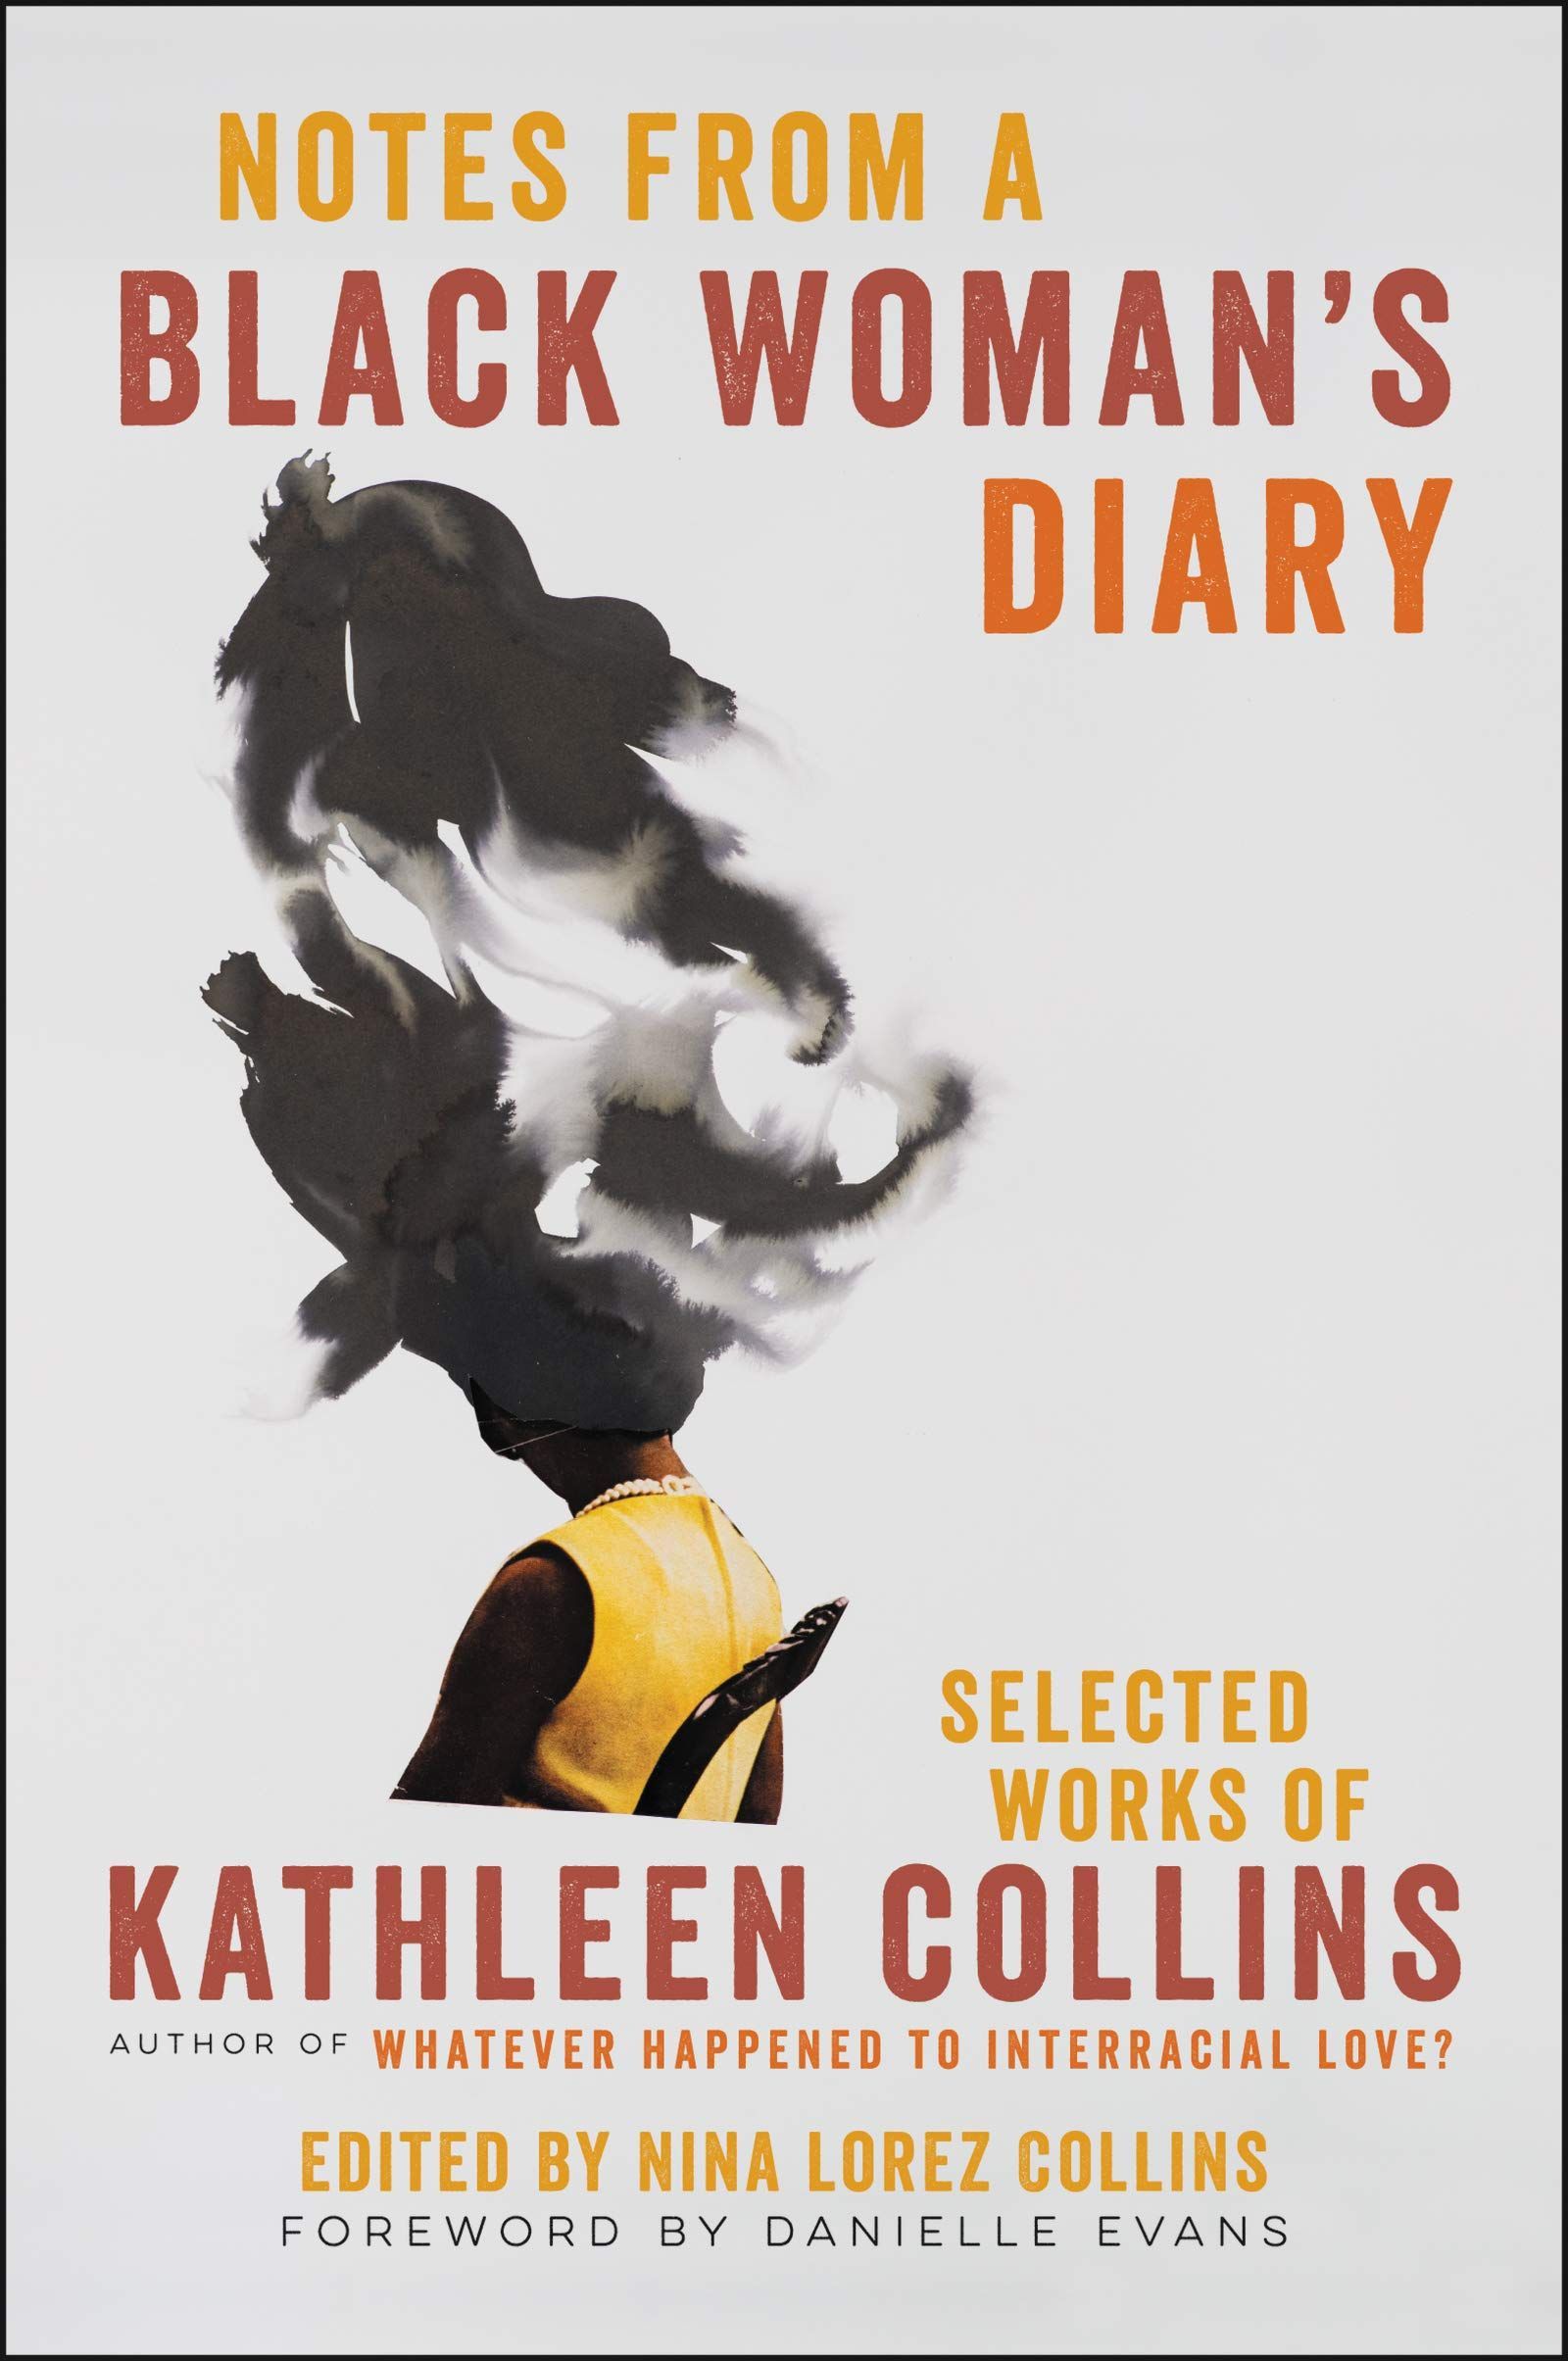 No Filters: On Kathleen Collins’s “Notes from a Black Woman’s Diary”